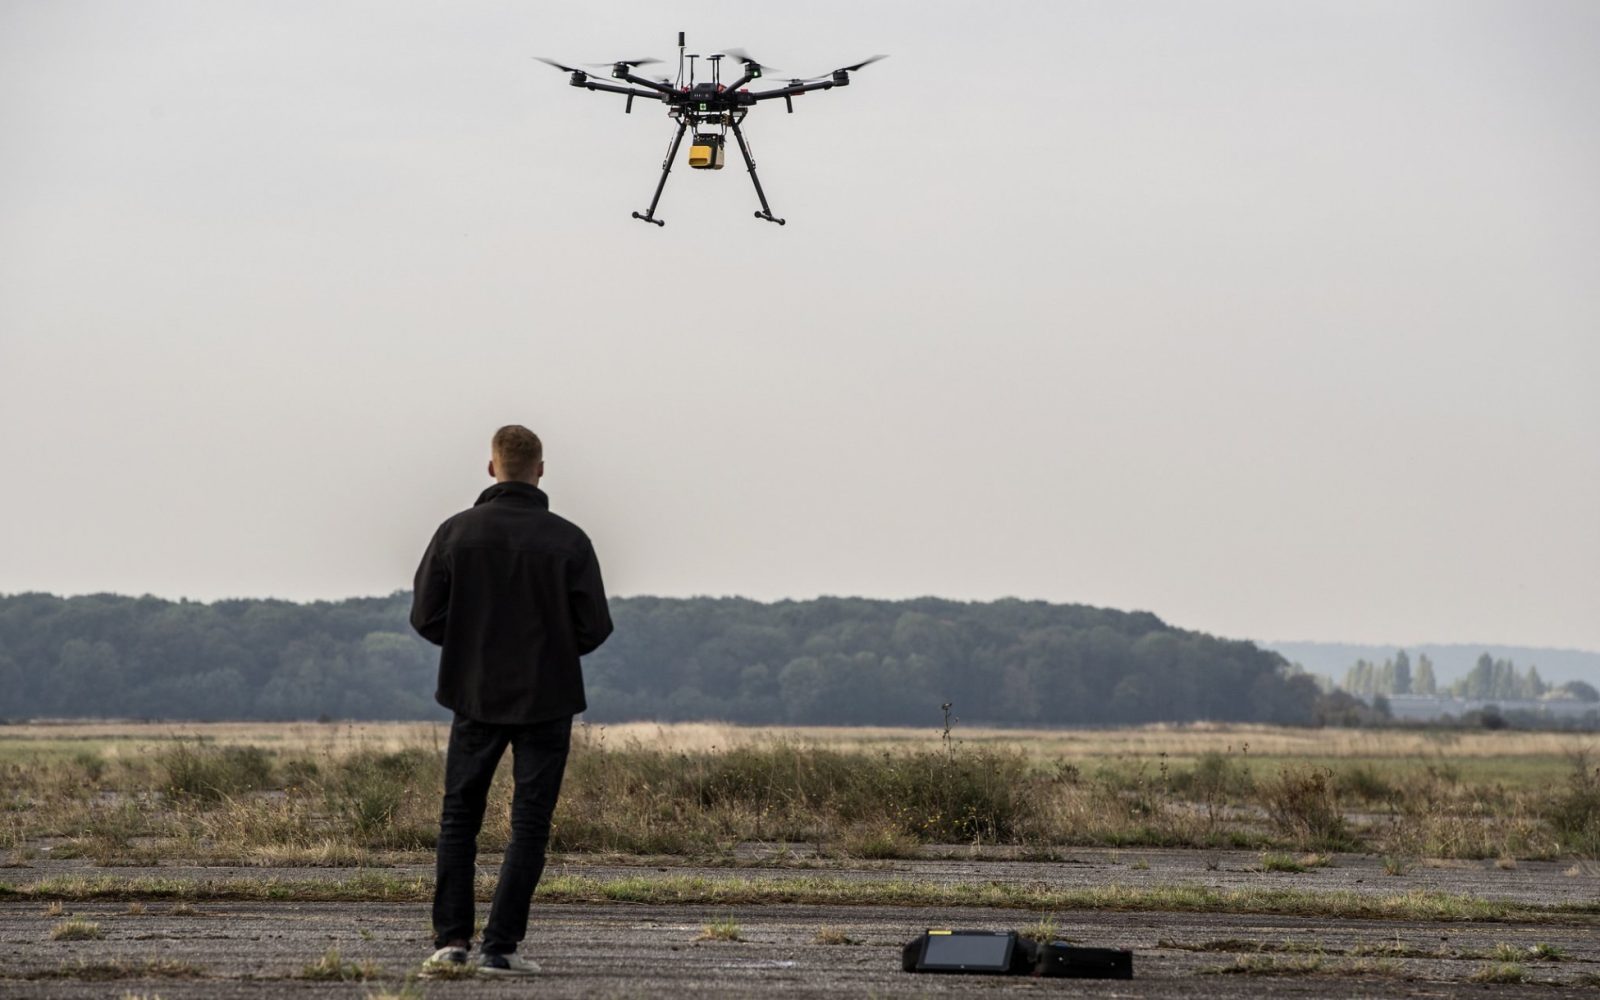 Project Safir aims to set rules commercial drone operations in Europe